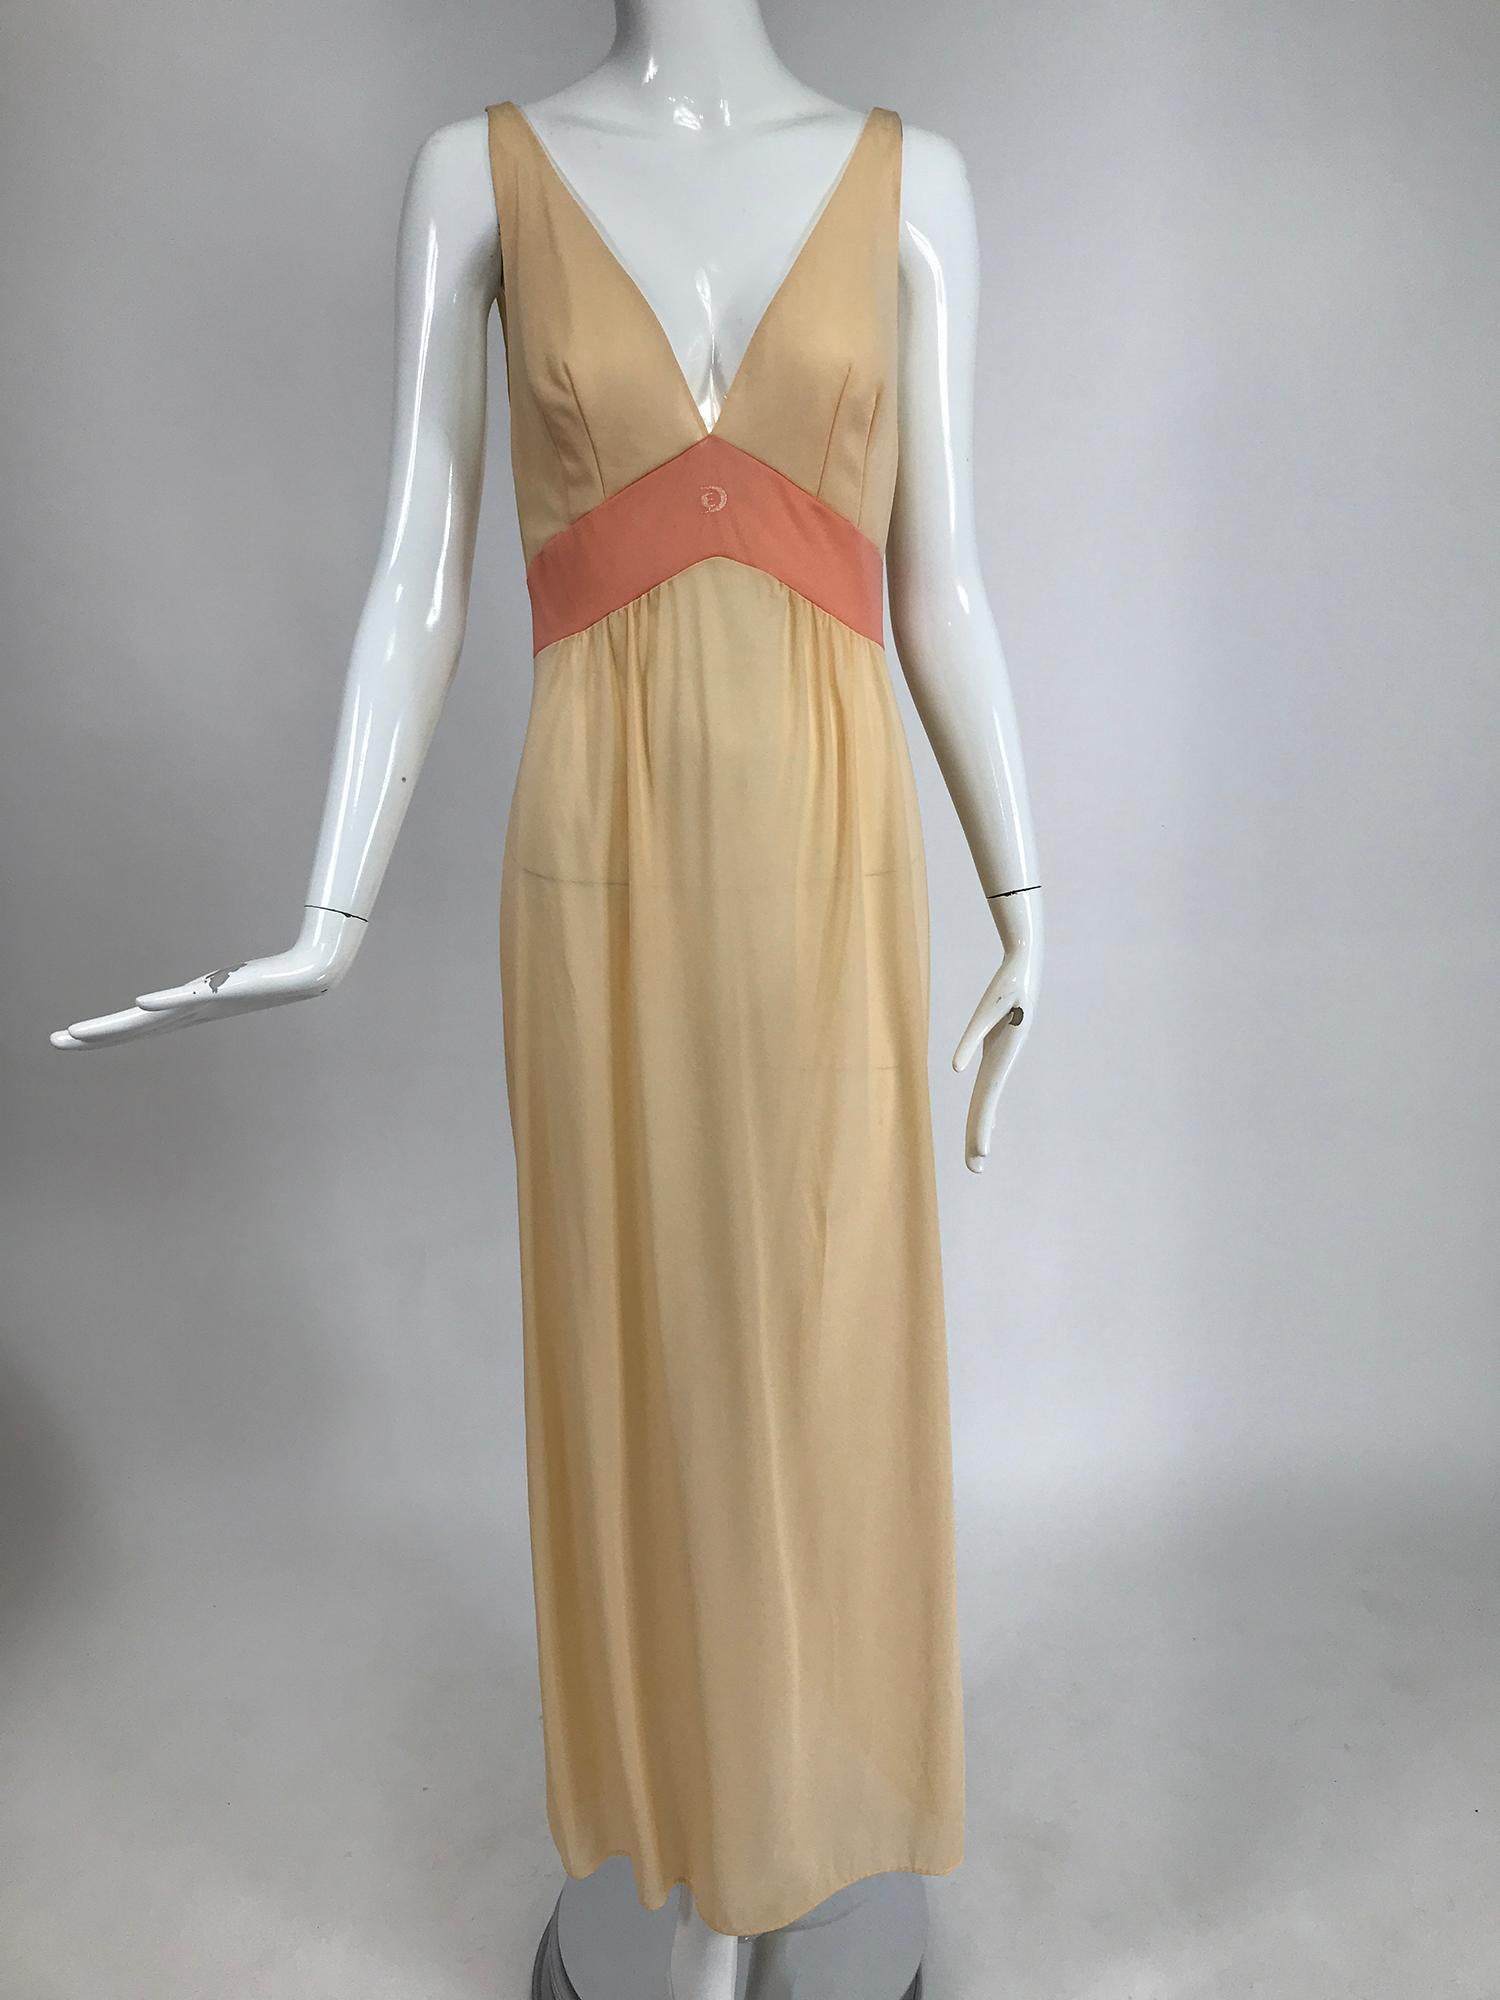 Emilio Pucci for Formfit Rogers 2pc. Sheer Peignoir Robe & Gown 1970s 2